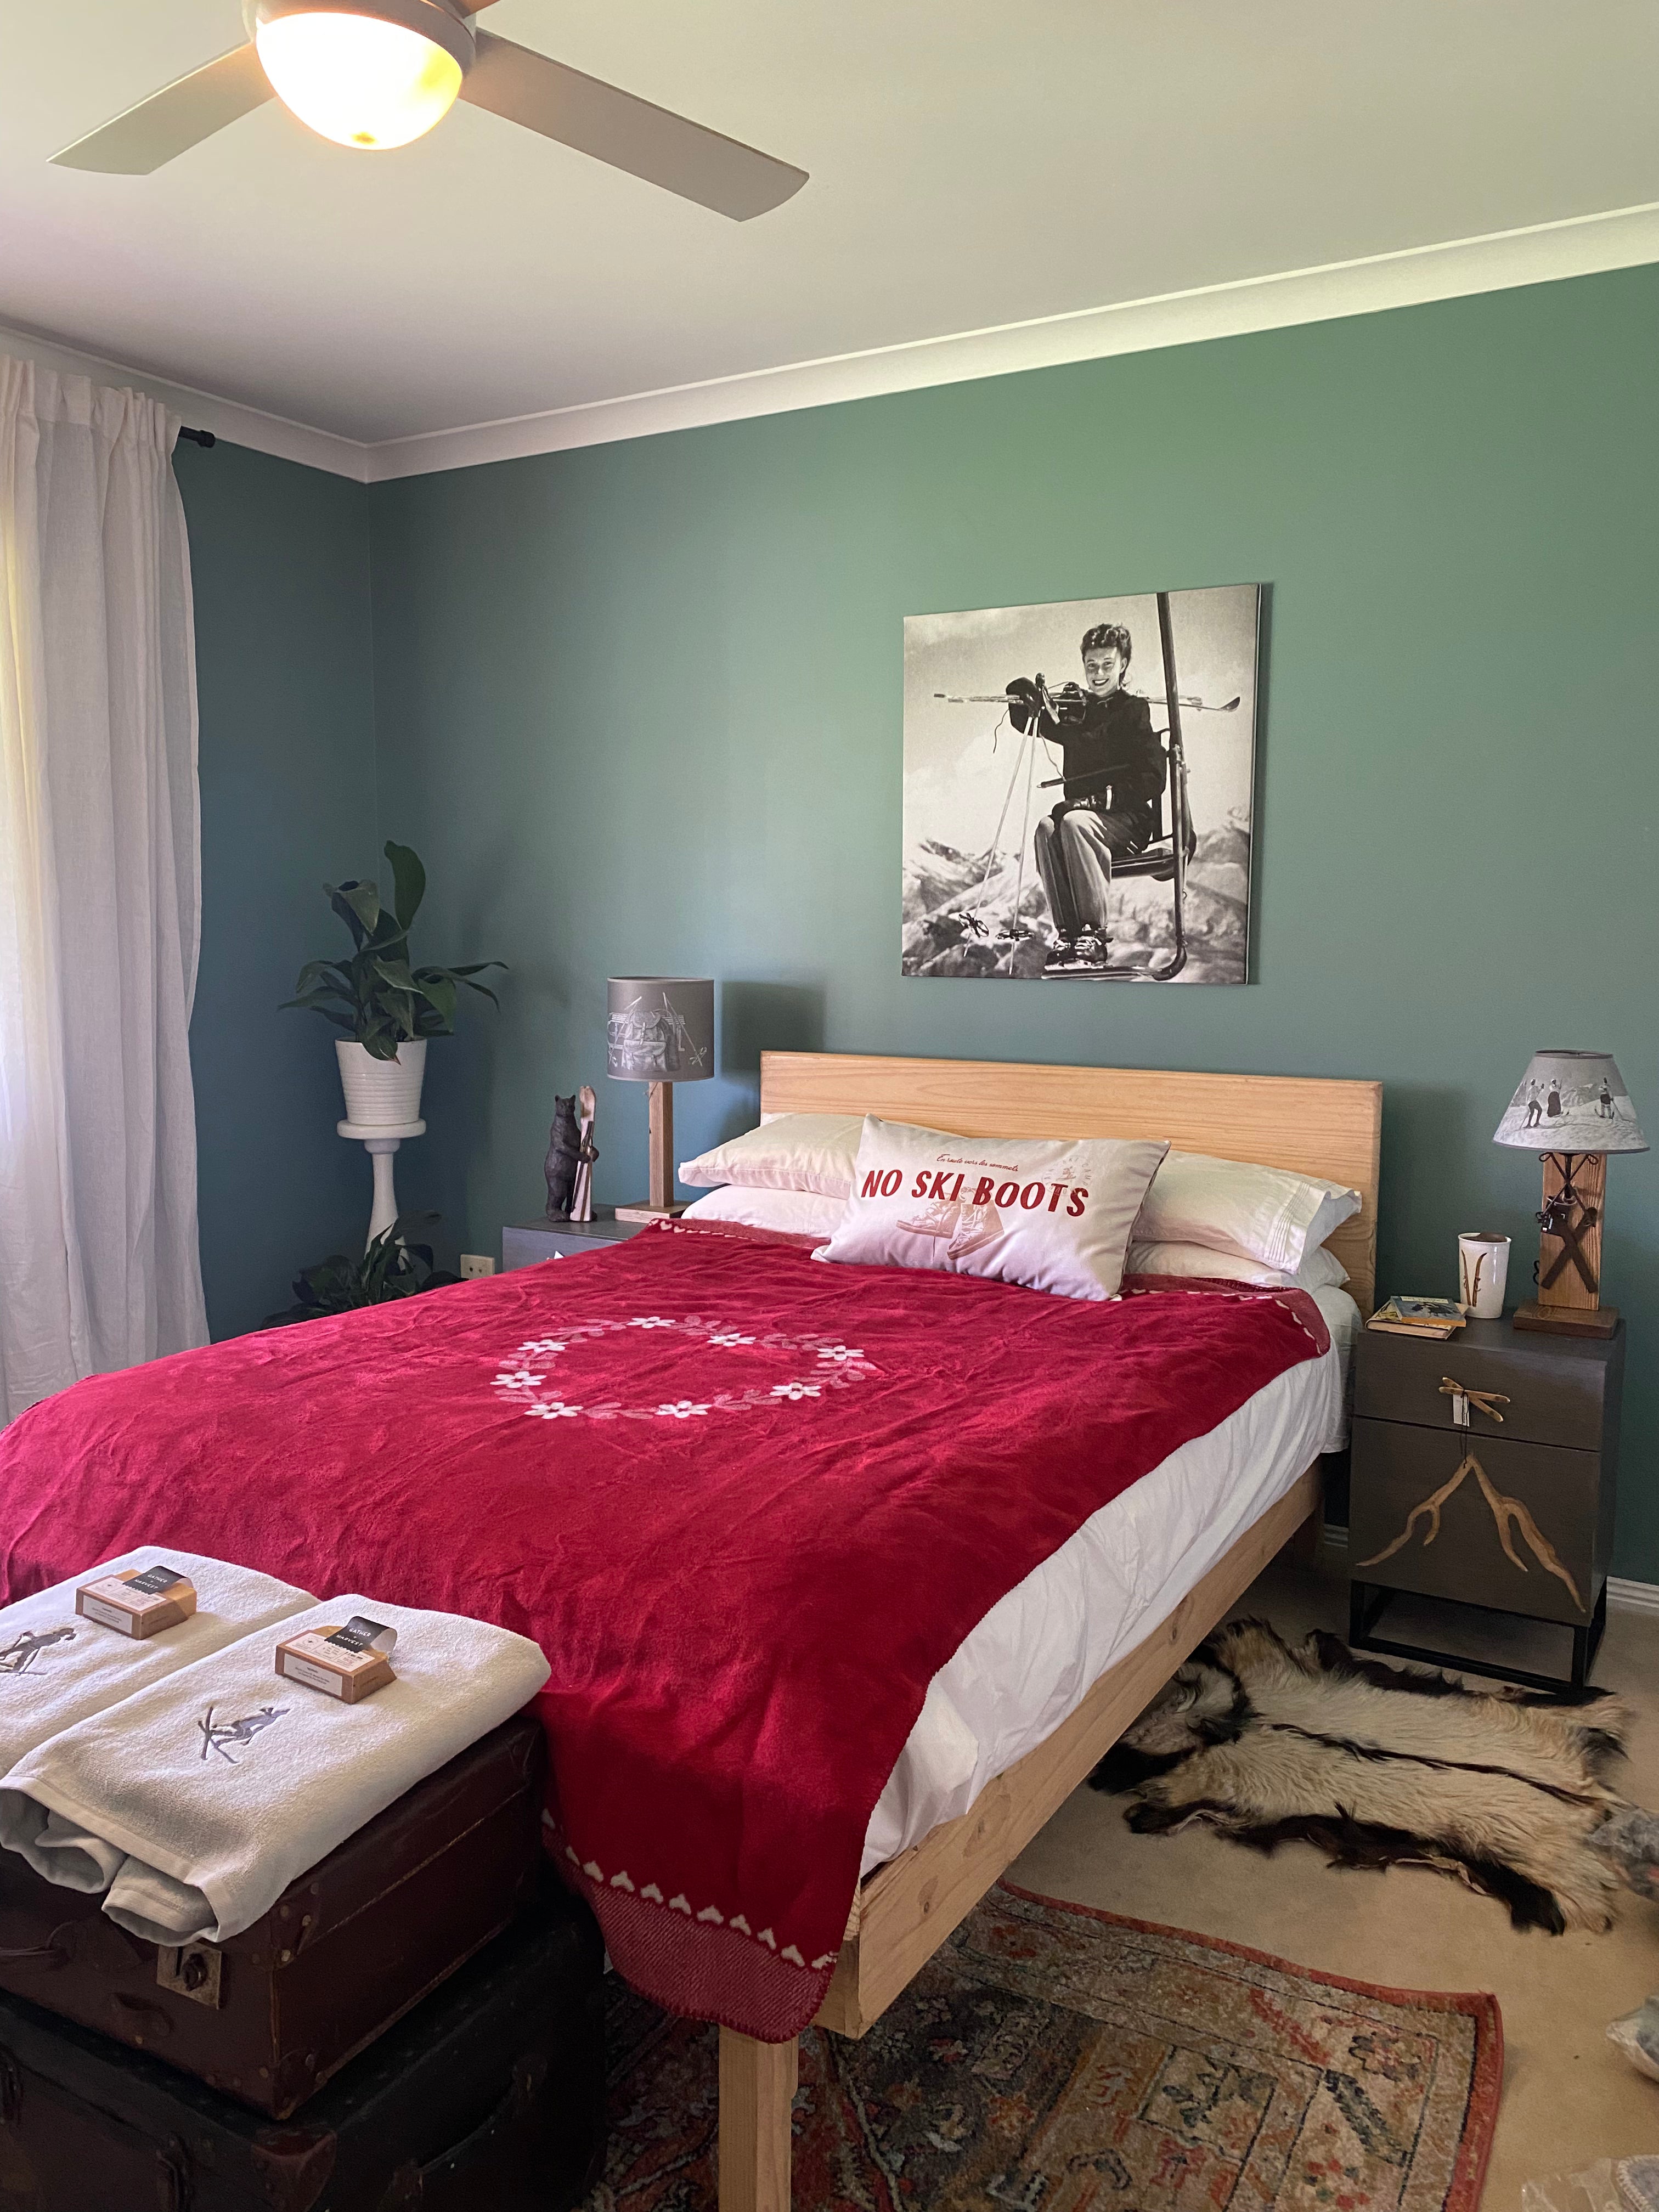 Wide angle view of a guest bedroom, with the Wooden Vintage Ski & Pole lamp on the right hand bedside table. Room painted green, with two towels and soaps resting on vintage suitcases at the end of the bed, a pot plant in the far corner, red blanket on the bed and one throw cushion